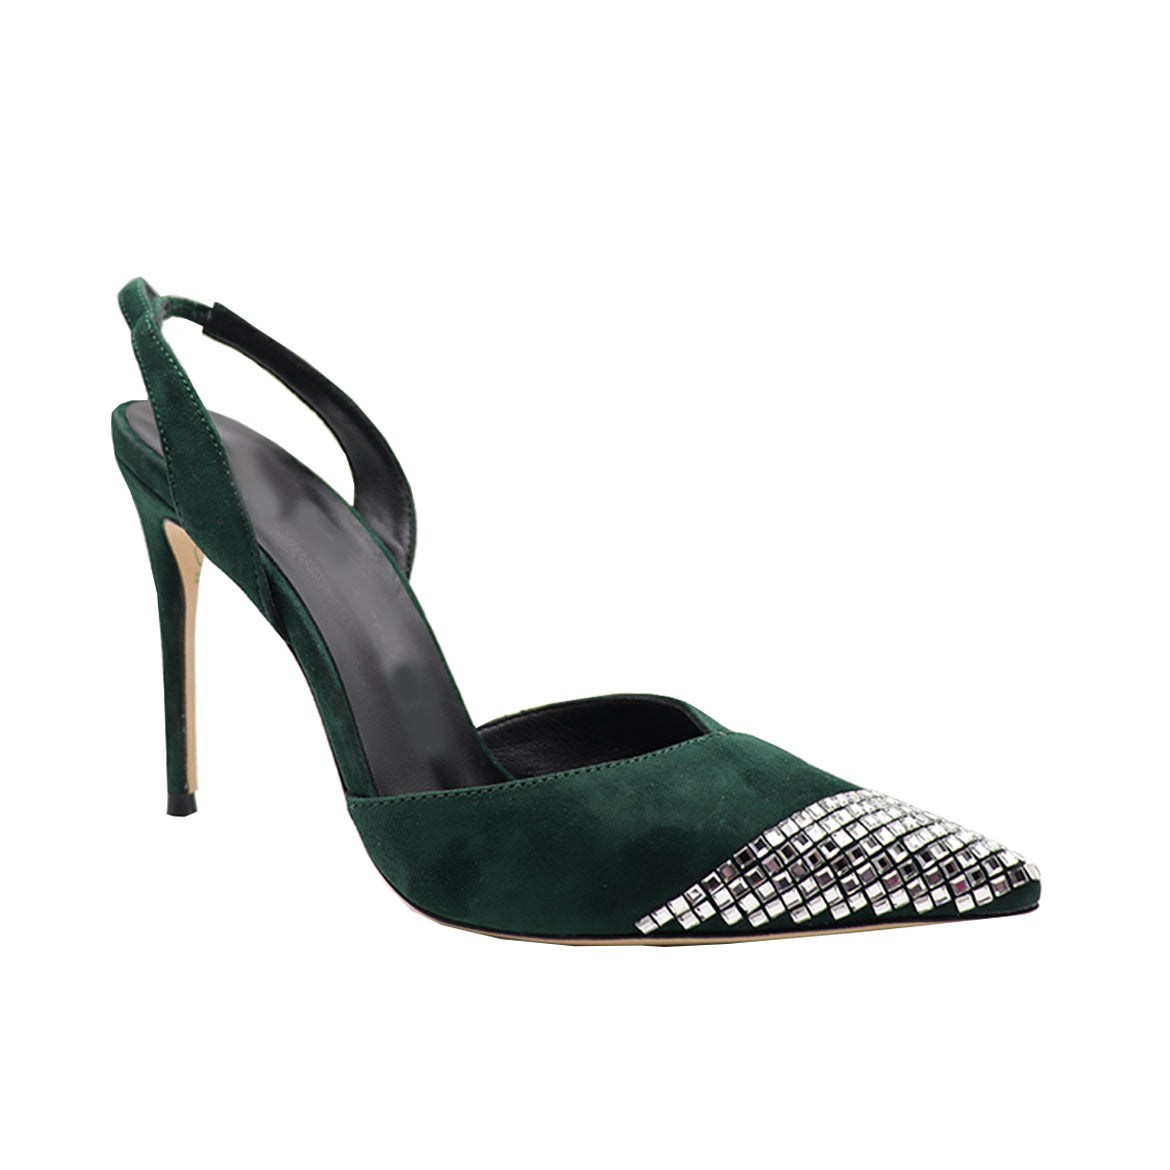 Dark Green Patent leather Heels | Antifur Iron the Toe with Drill Pointy Toe Heels: A Unique and Fashionable Choice